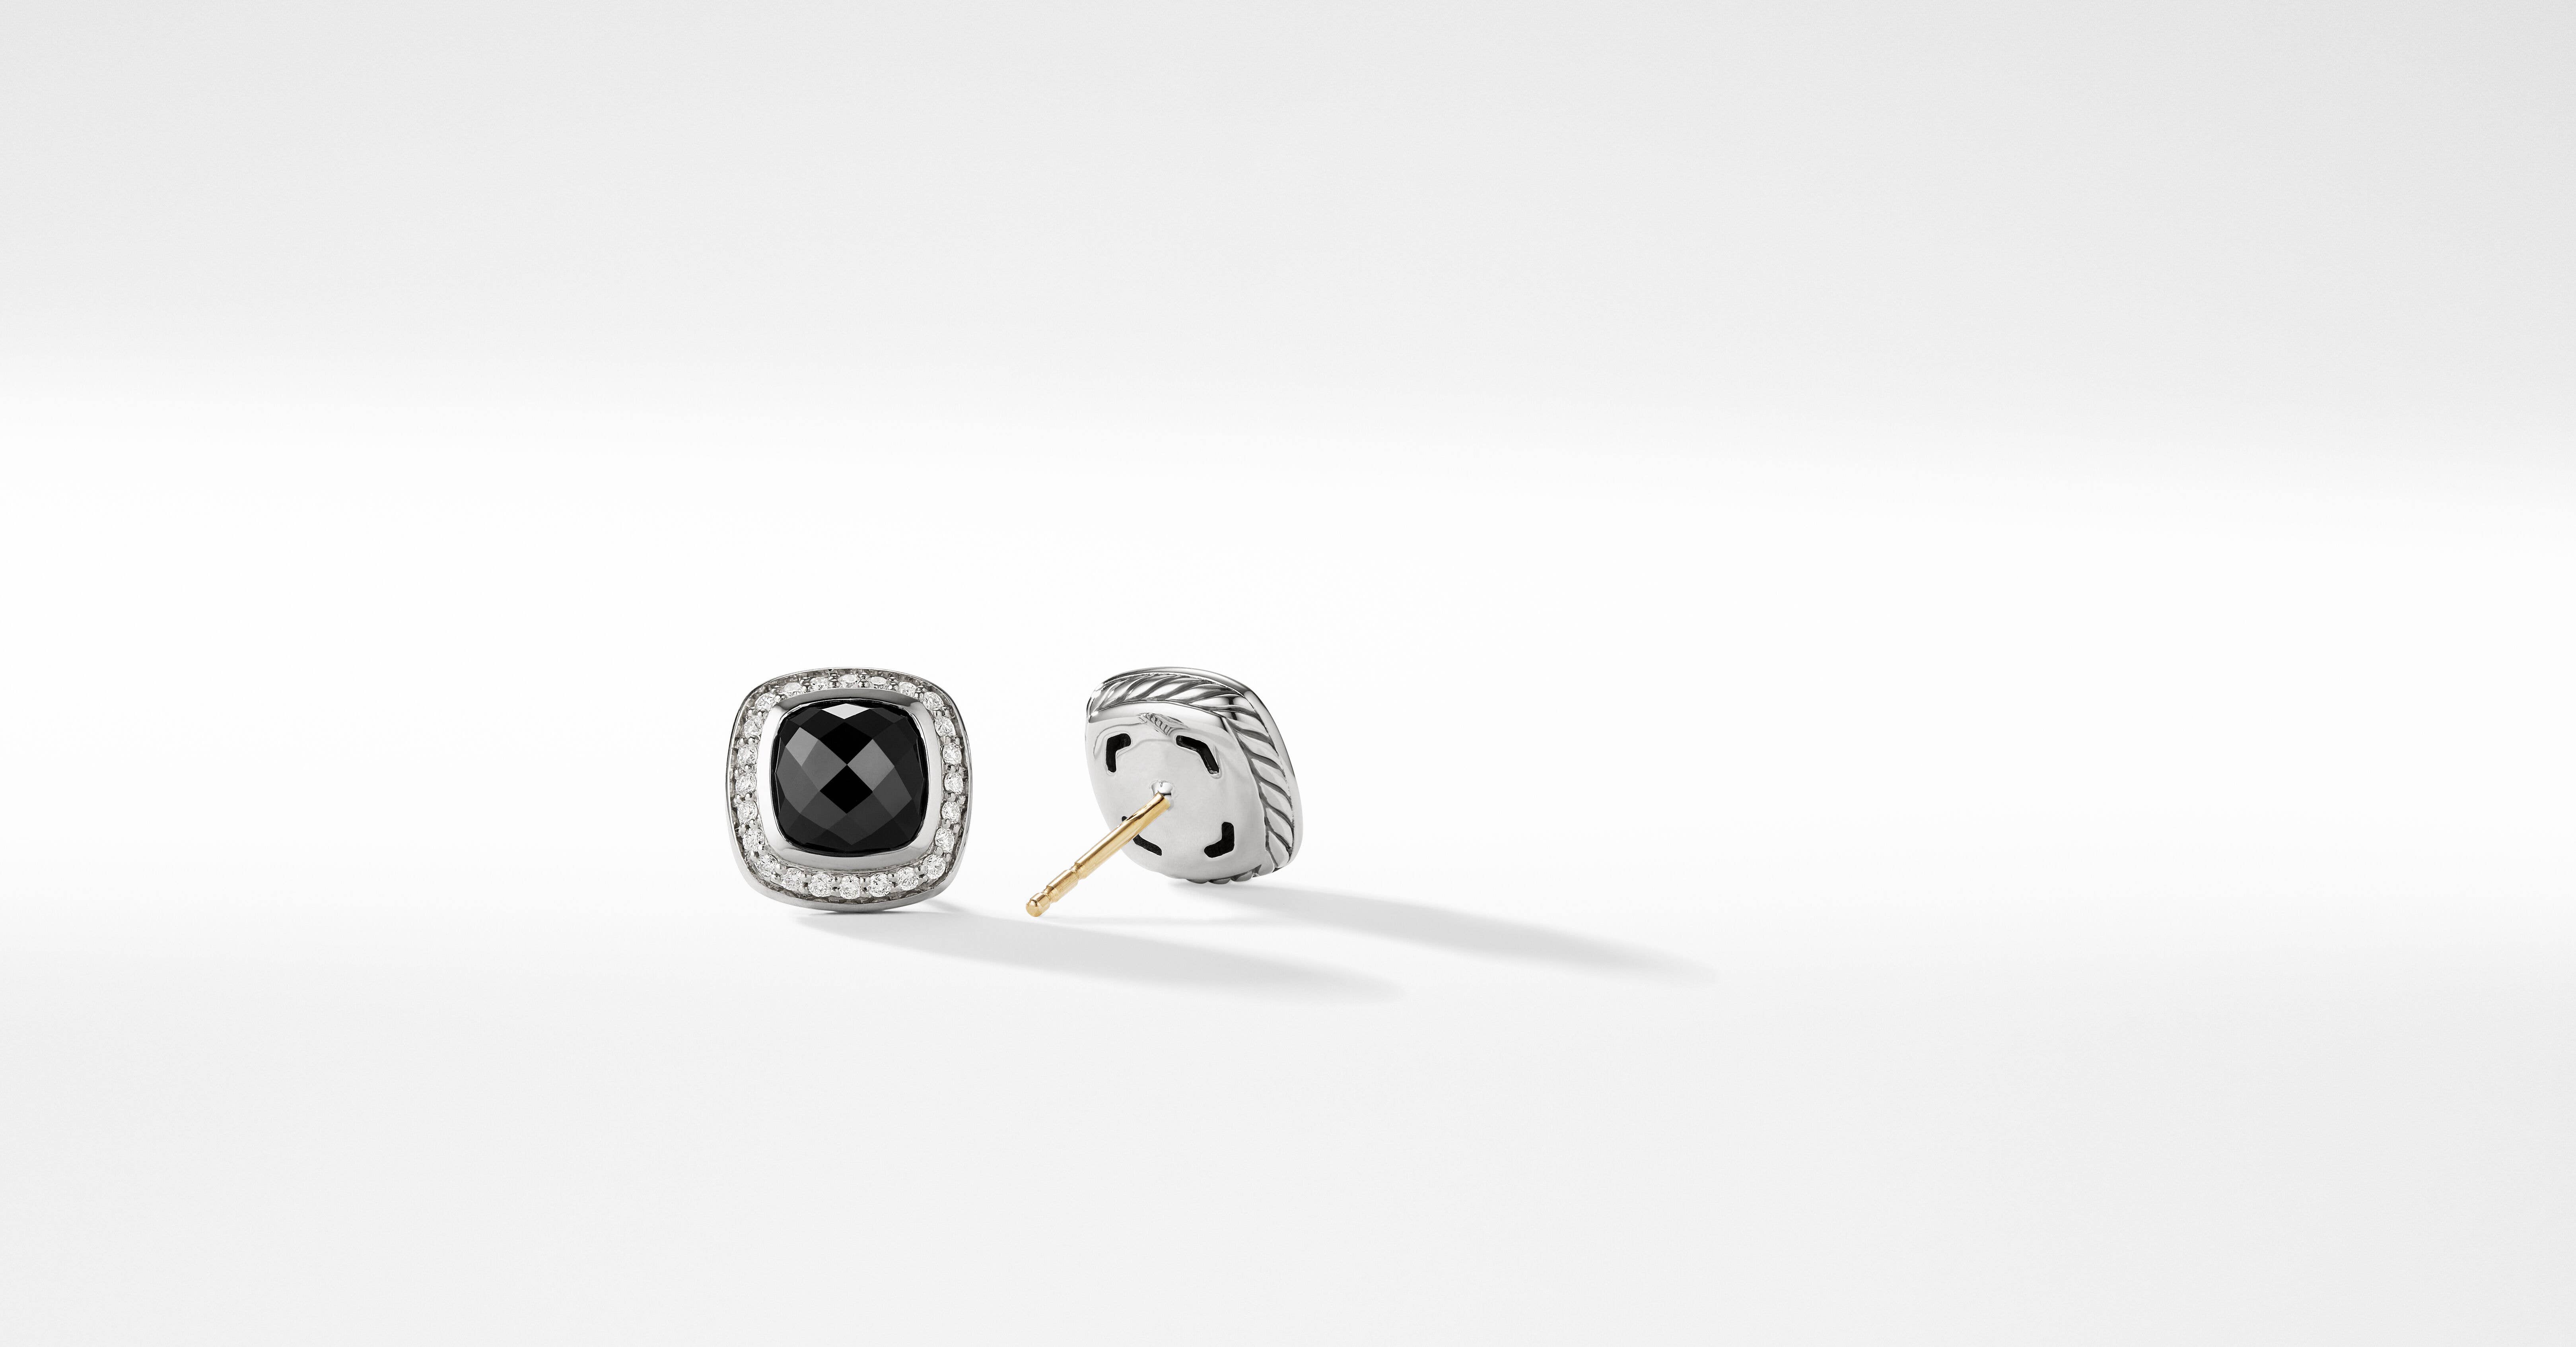 Albion® Stud Earrings in Sterling Silver with Black Onyx and Pavé